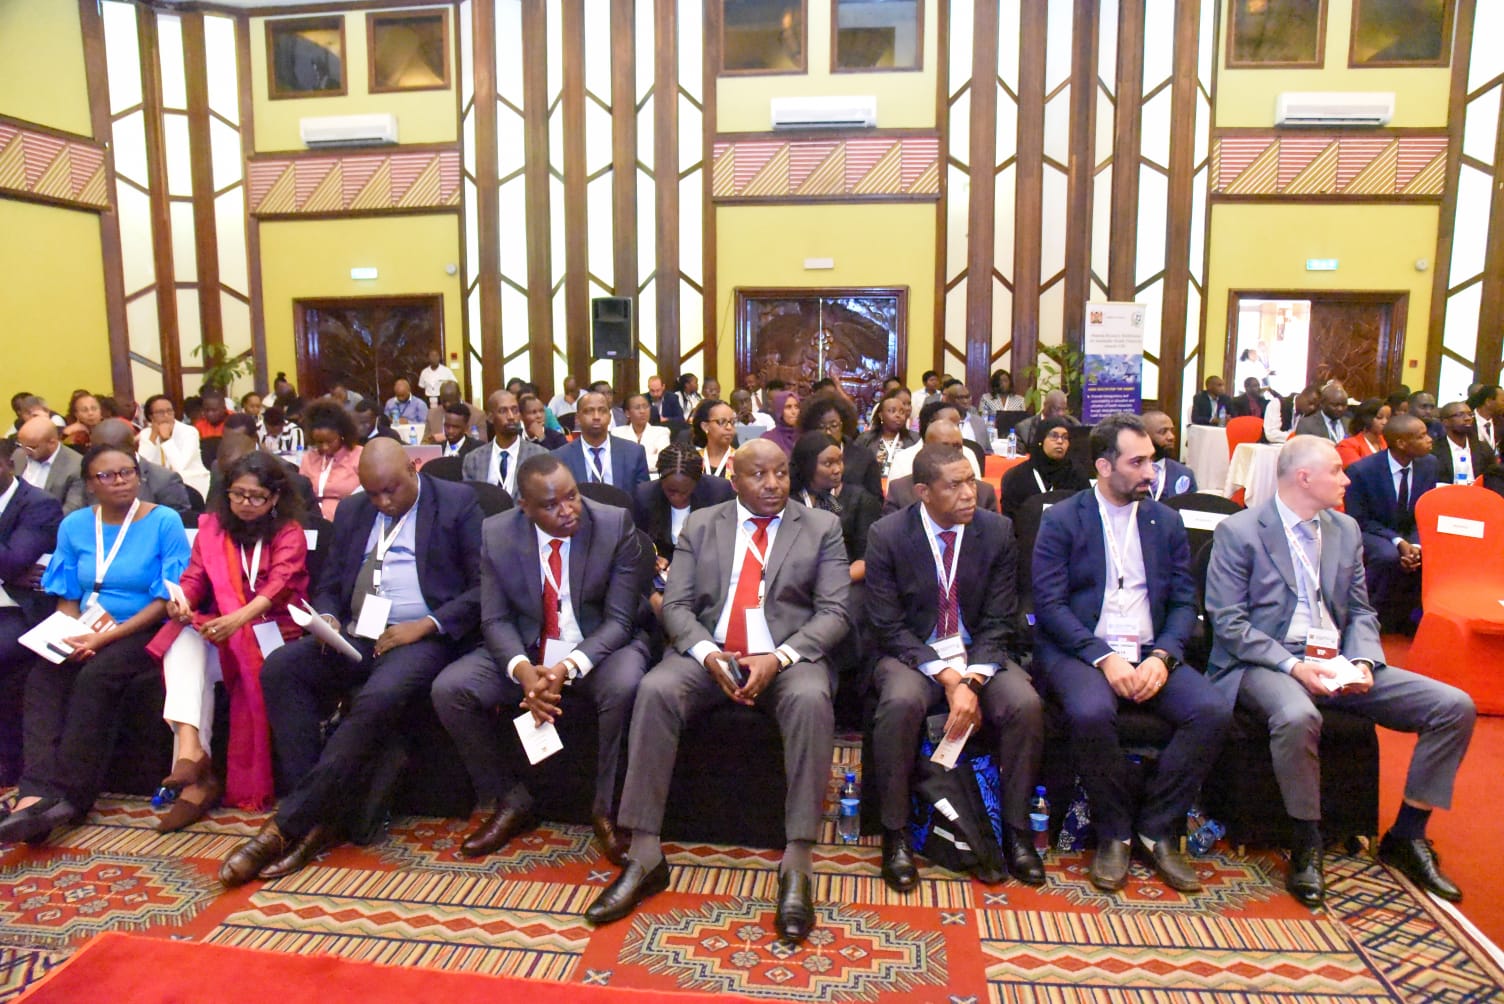 Kenya Takes Lead in Sustainable Healthcare Financing at National Health Financing Dialogue